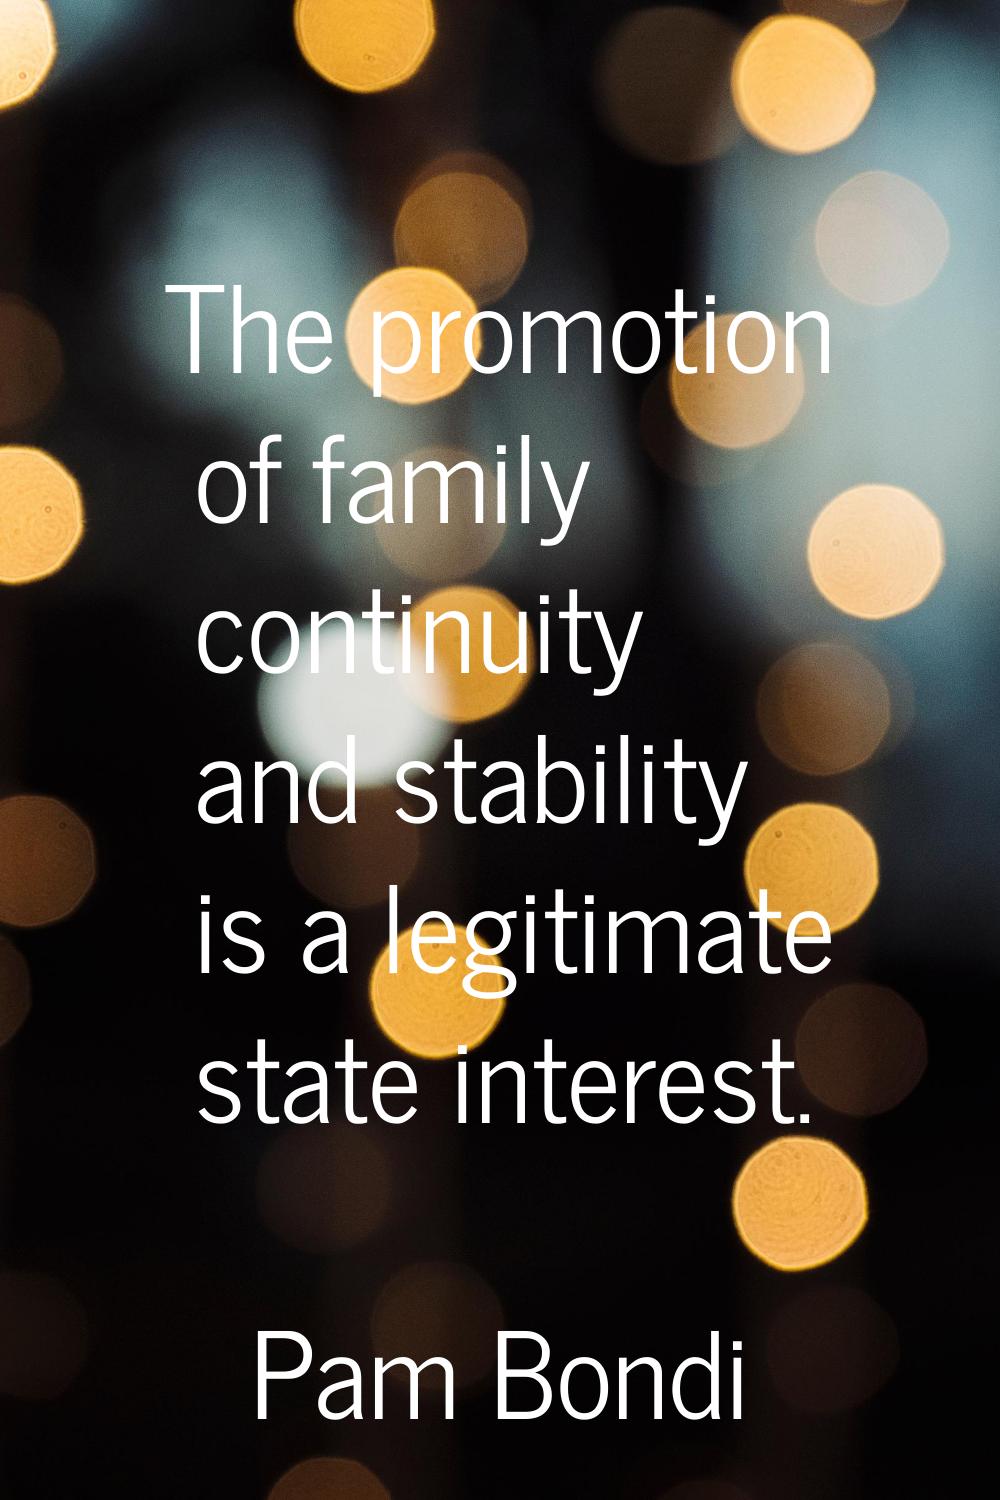 The promotion of family continuity and stability is a legitimate state interest.